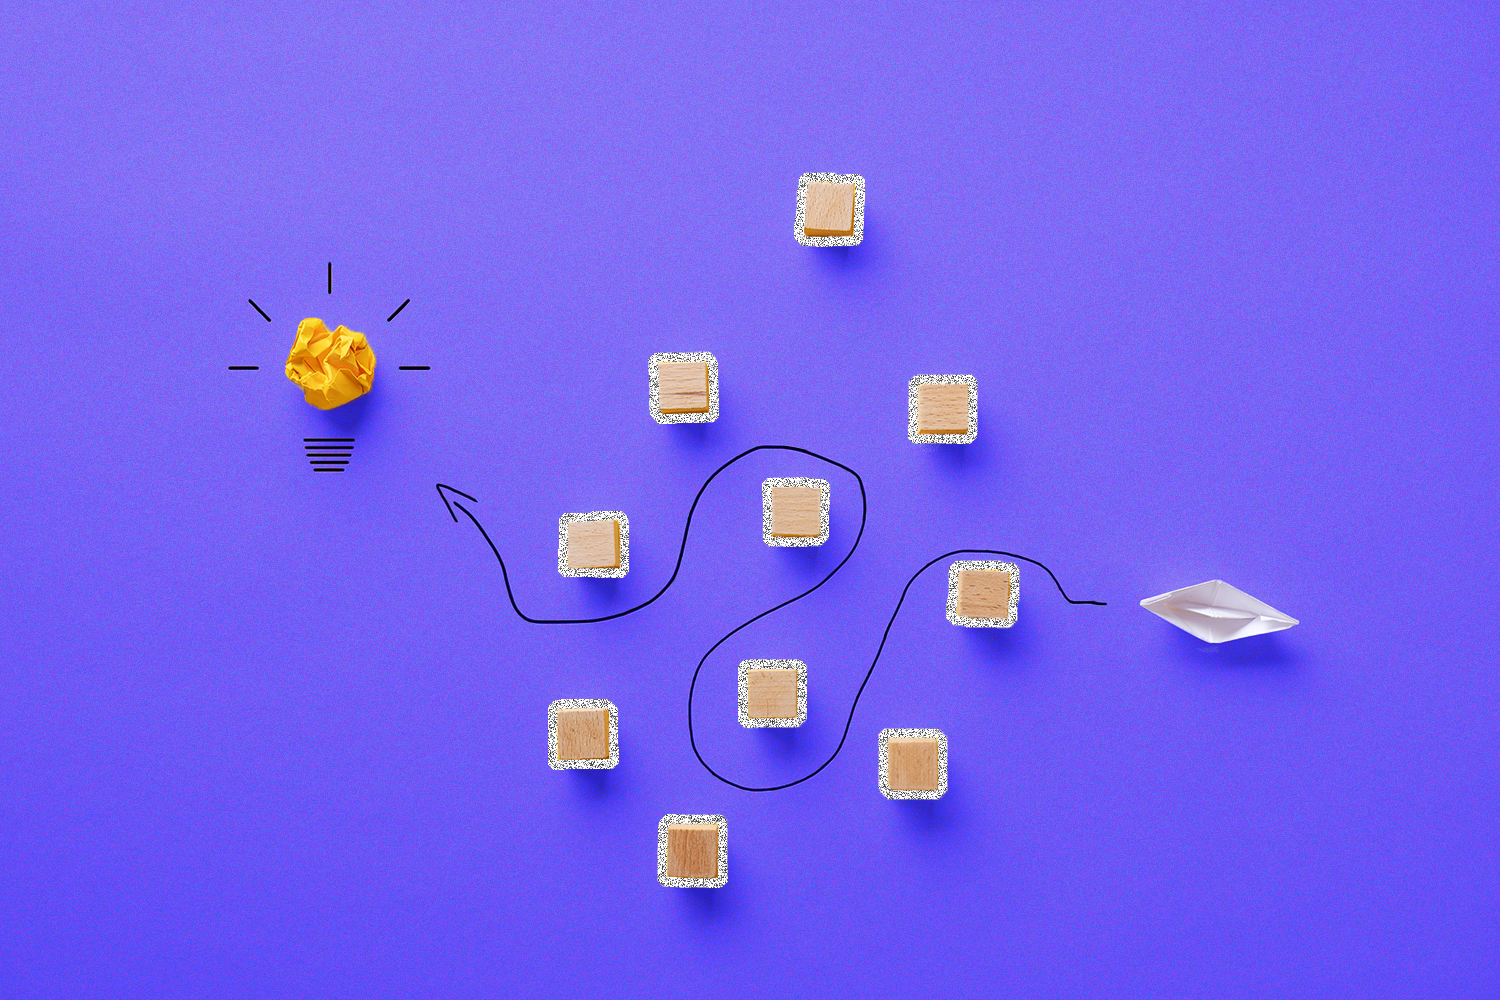 A white paper boat navigating past square blocks to reach a yellow paper lightbulb on a purple background